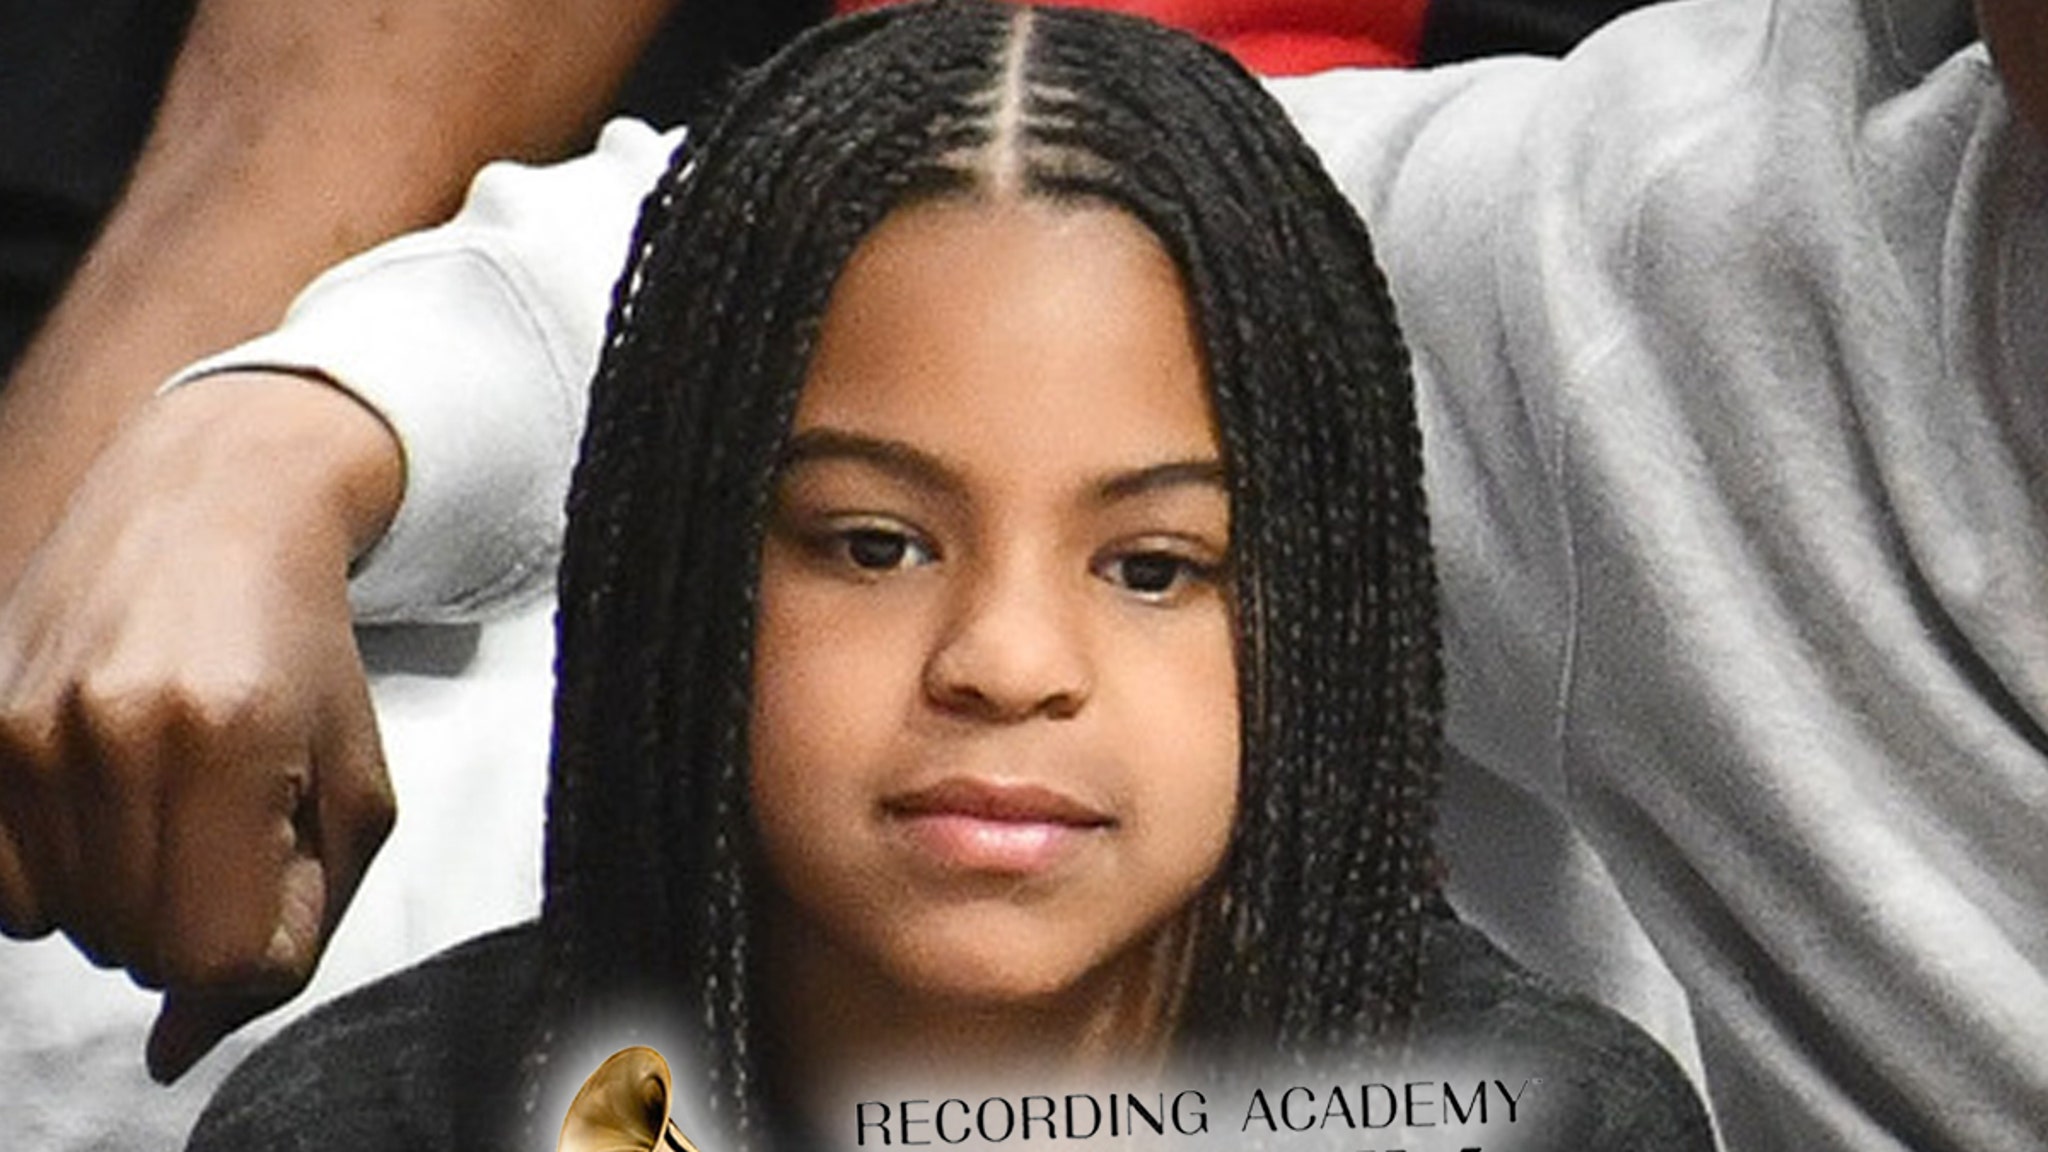 Beyoncé’s 9-year-old daughter Blue Ivy wins her first Grammy